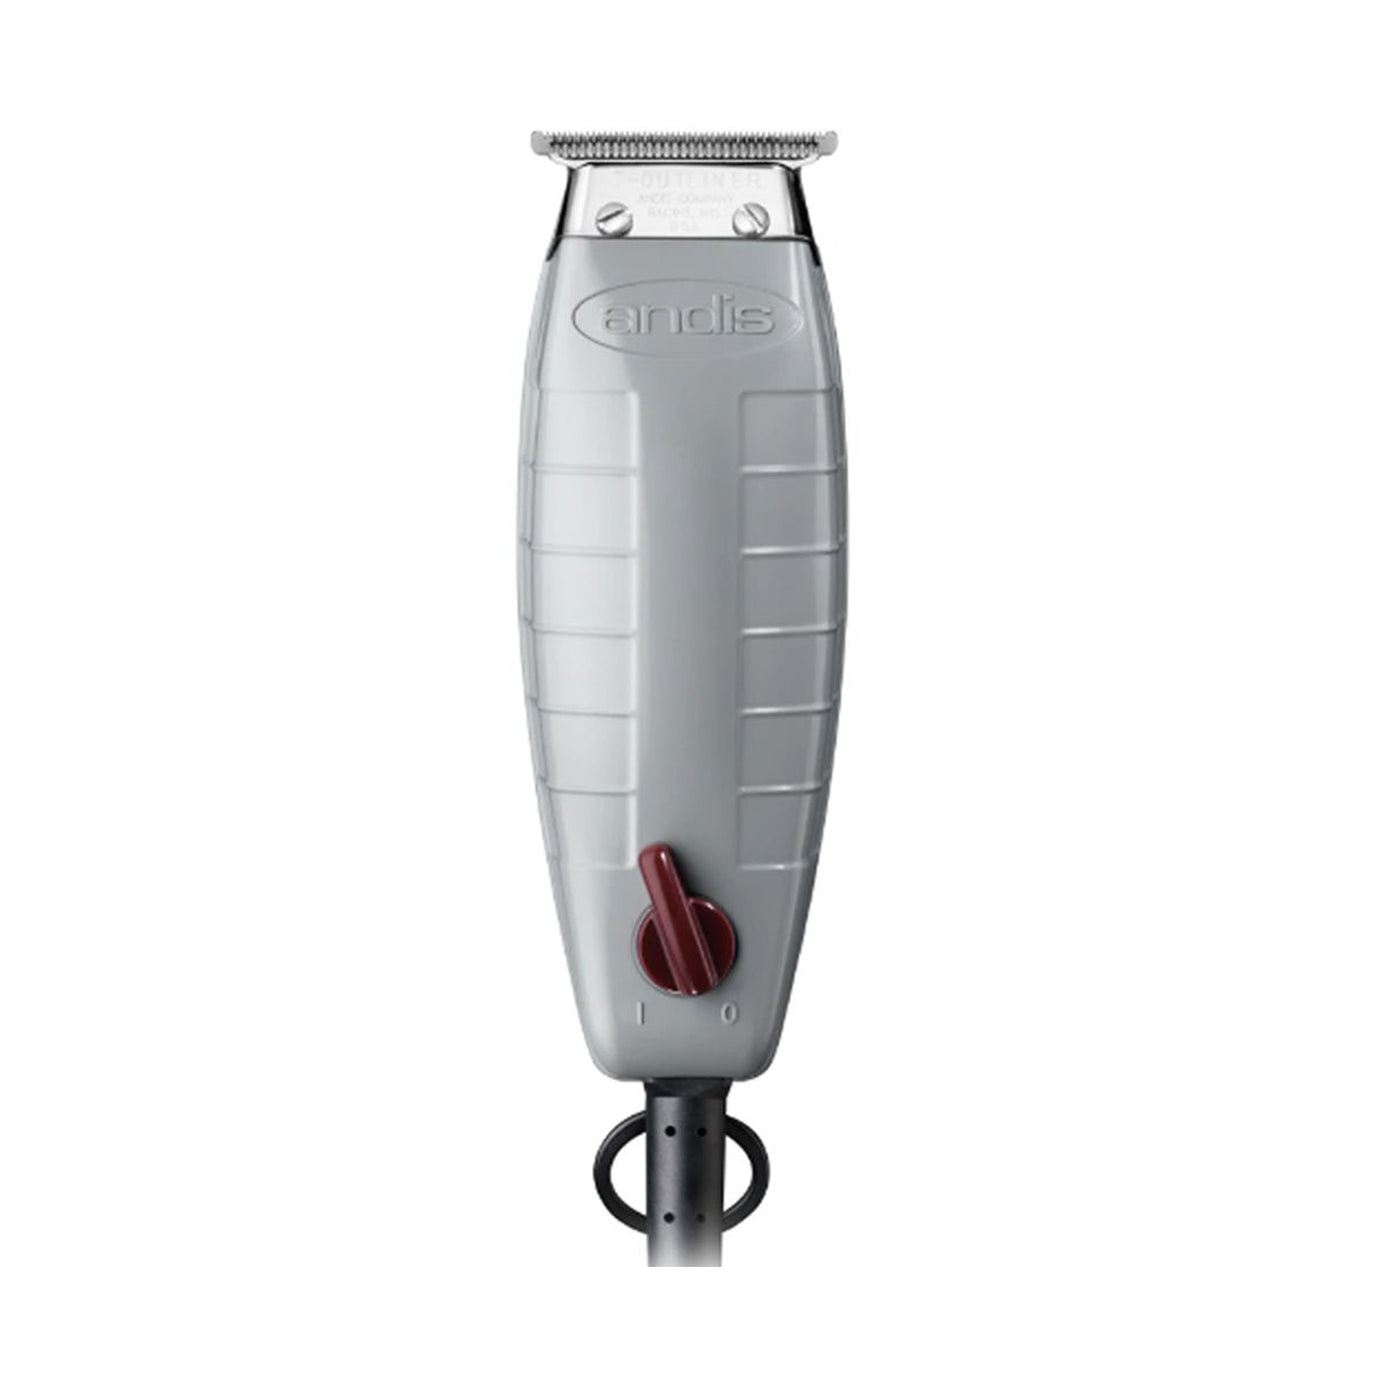 Andis Professional T-Outliner Trimmer